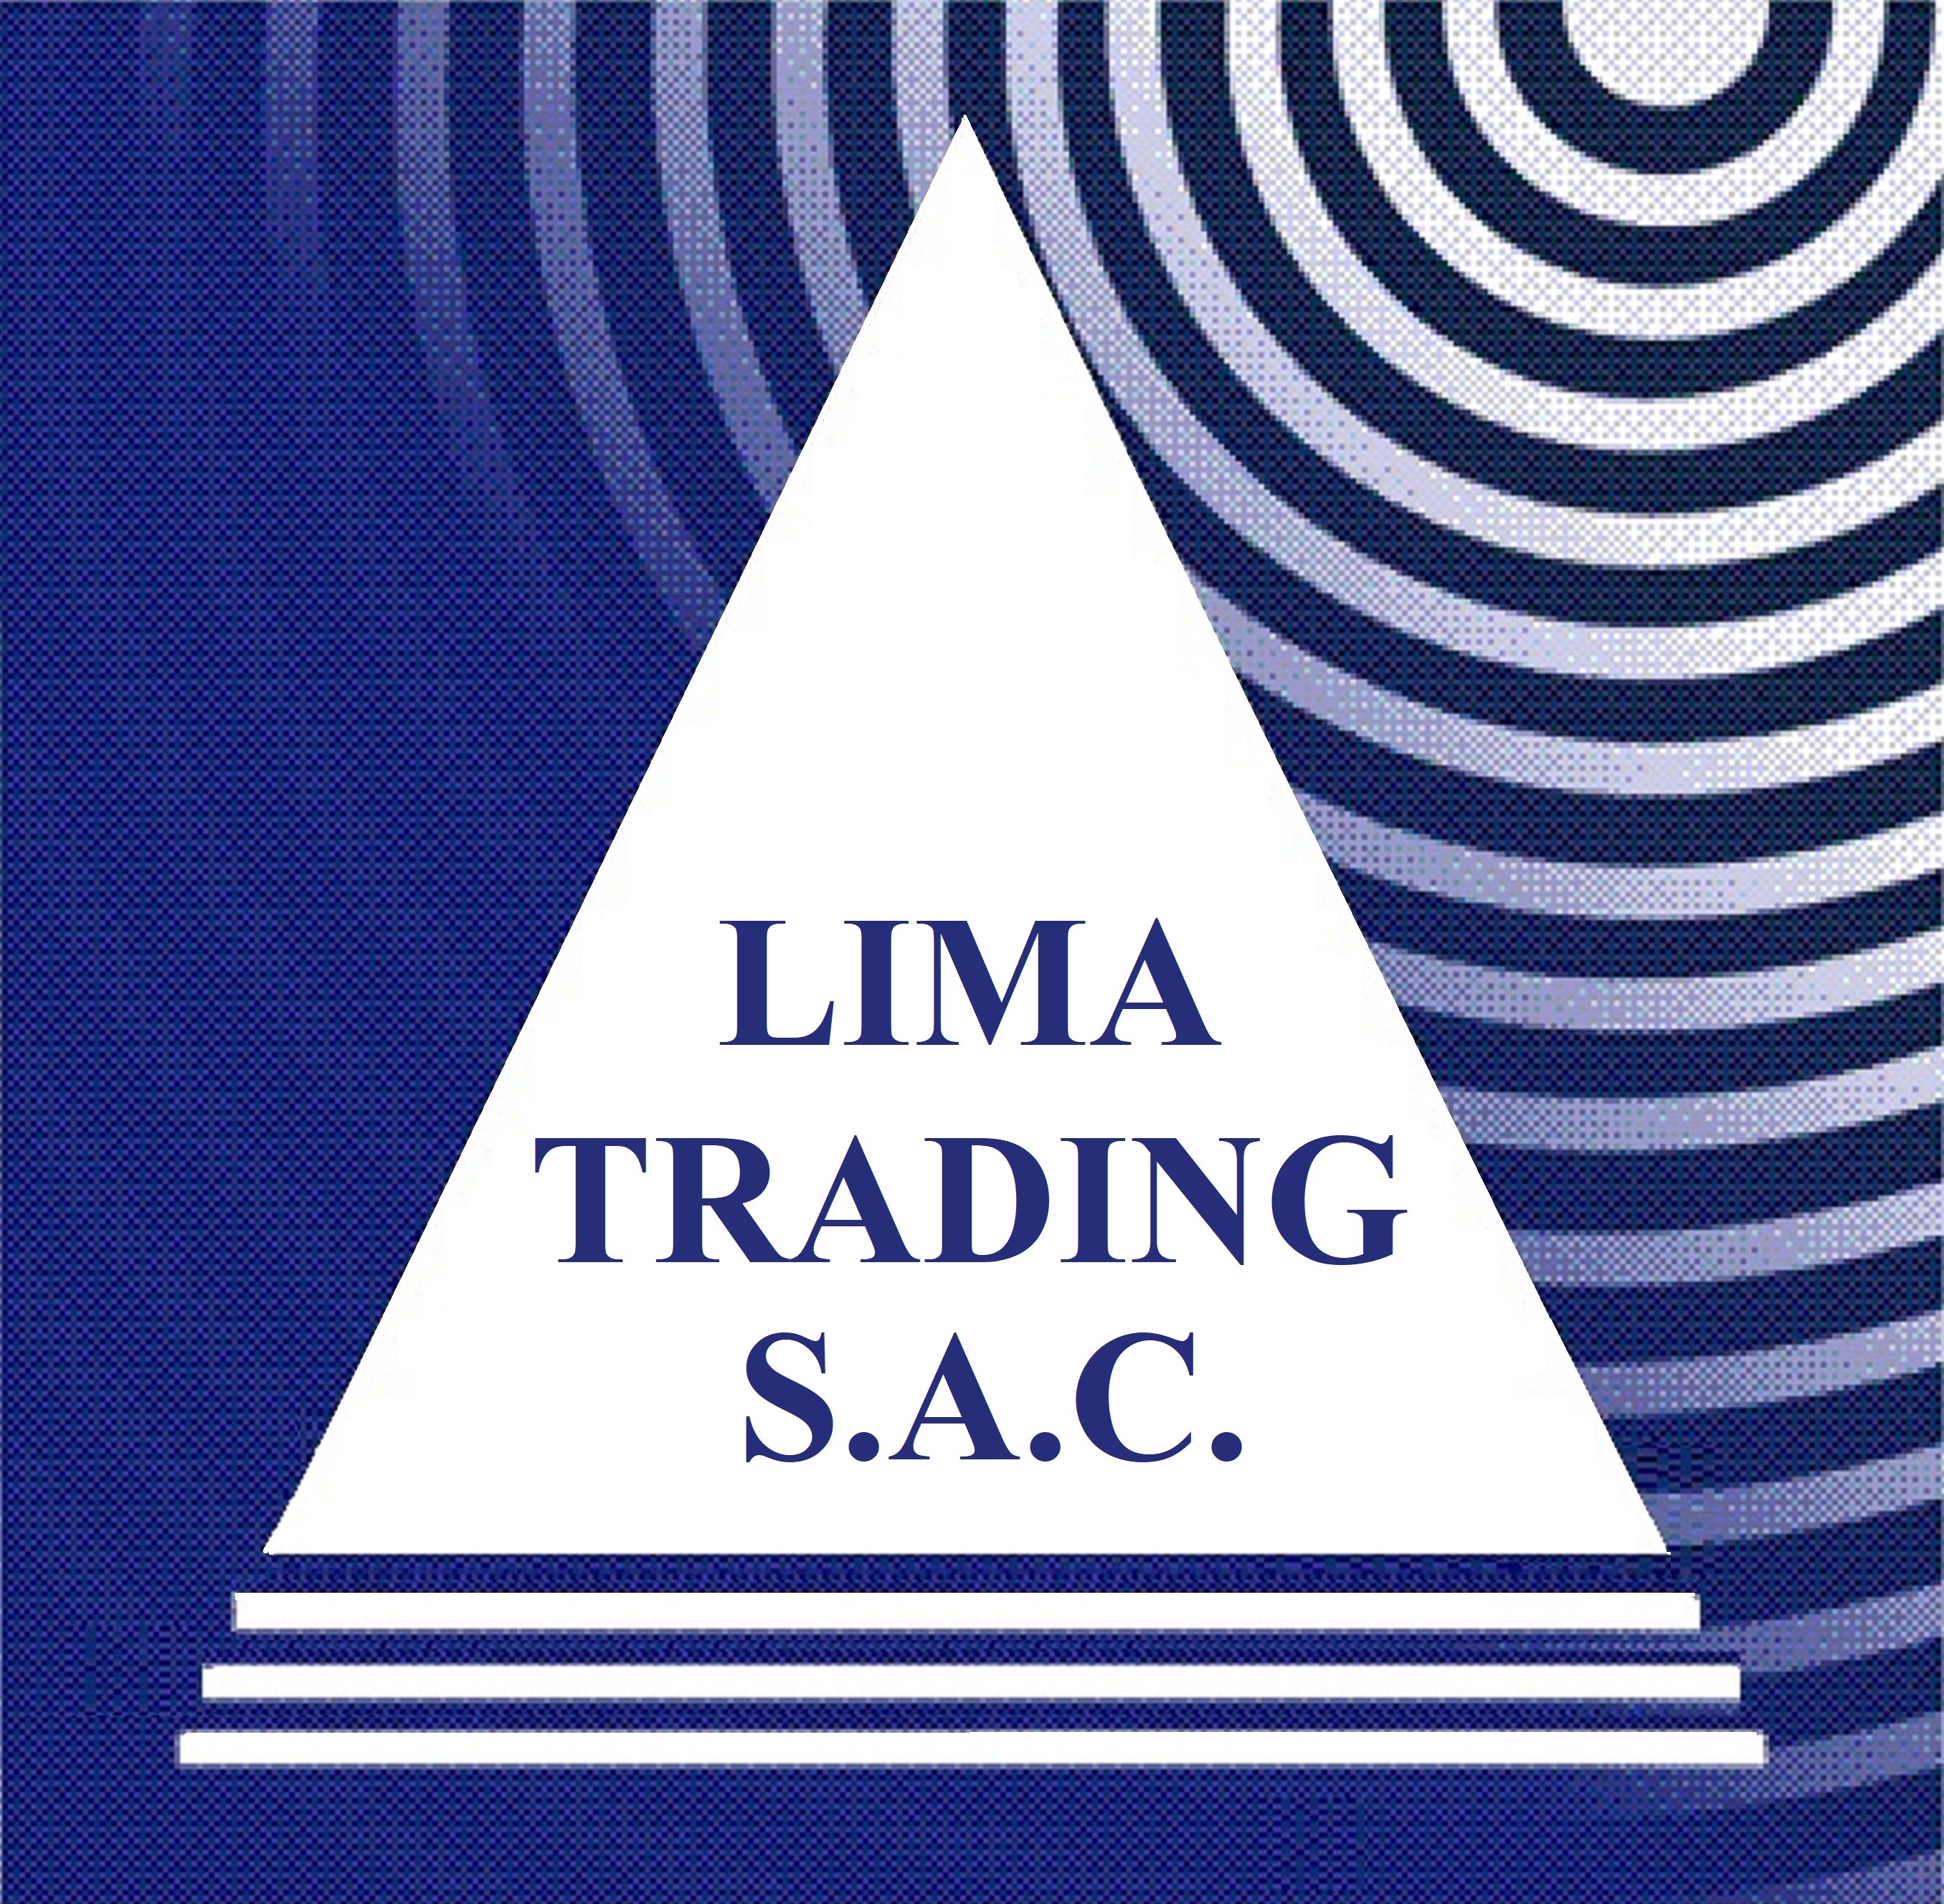 LIMA TRADING S.A.C.